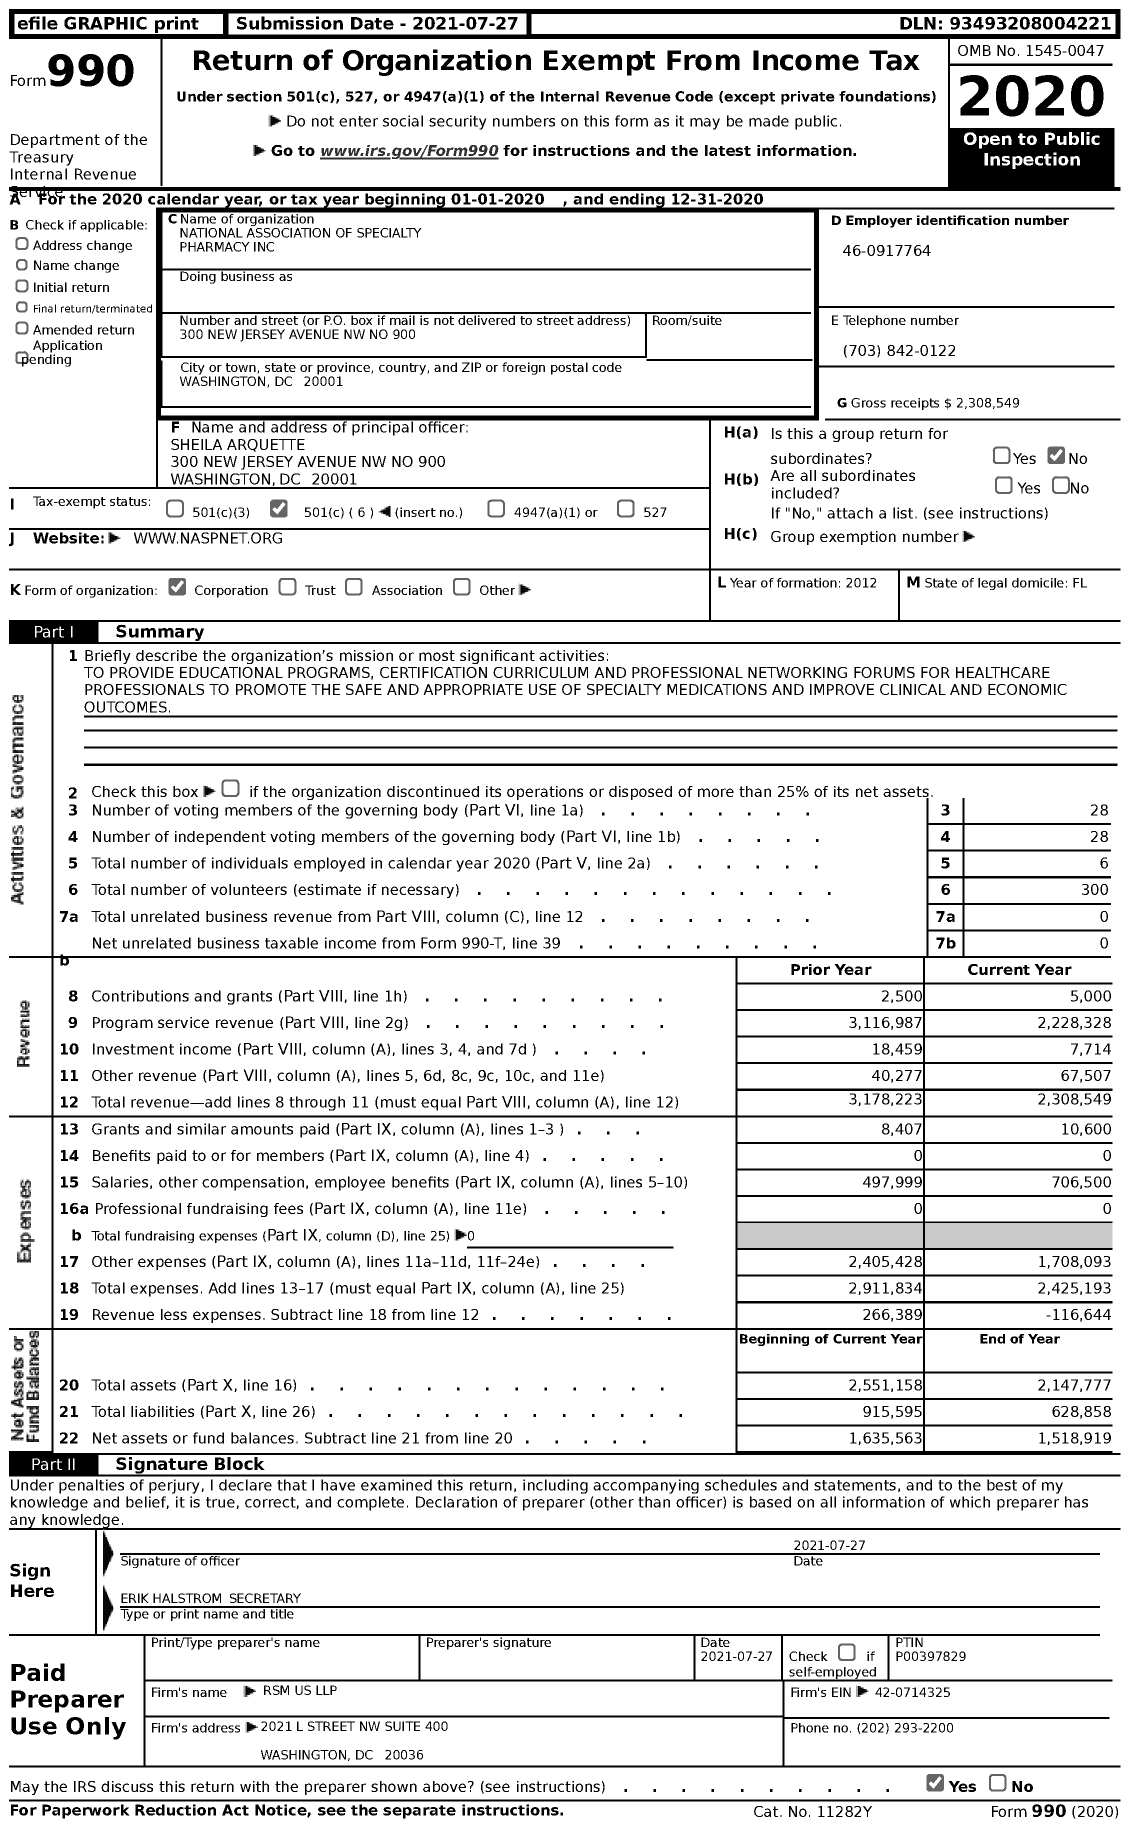 Image of first page of 2020 Form 990 for National Association of Specialty Pharmacy (NASP)